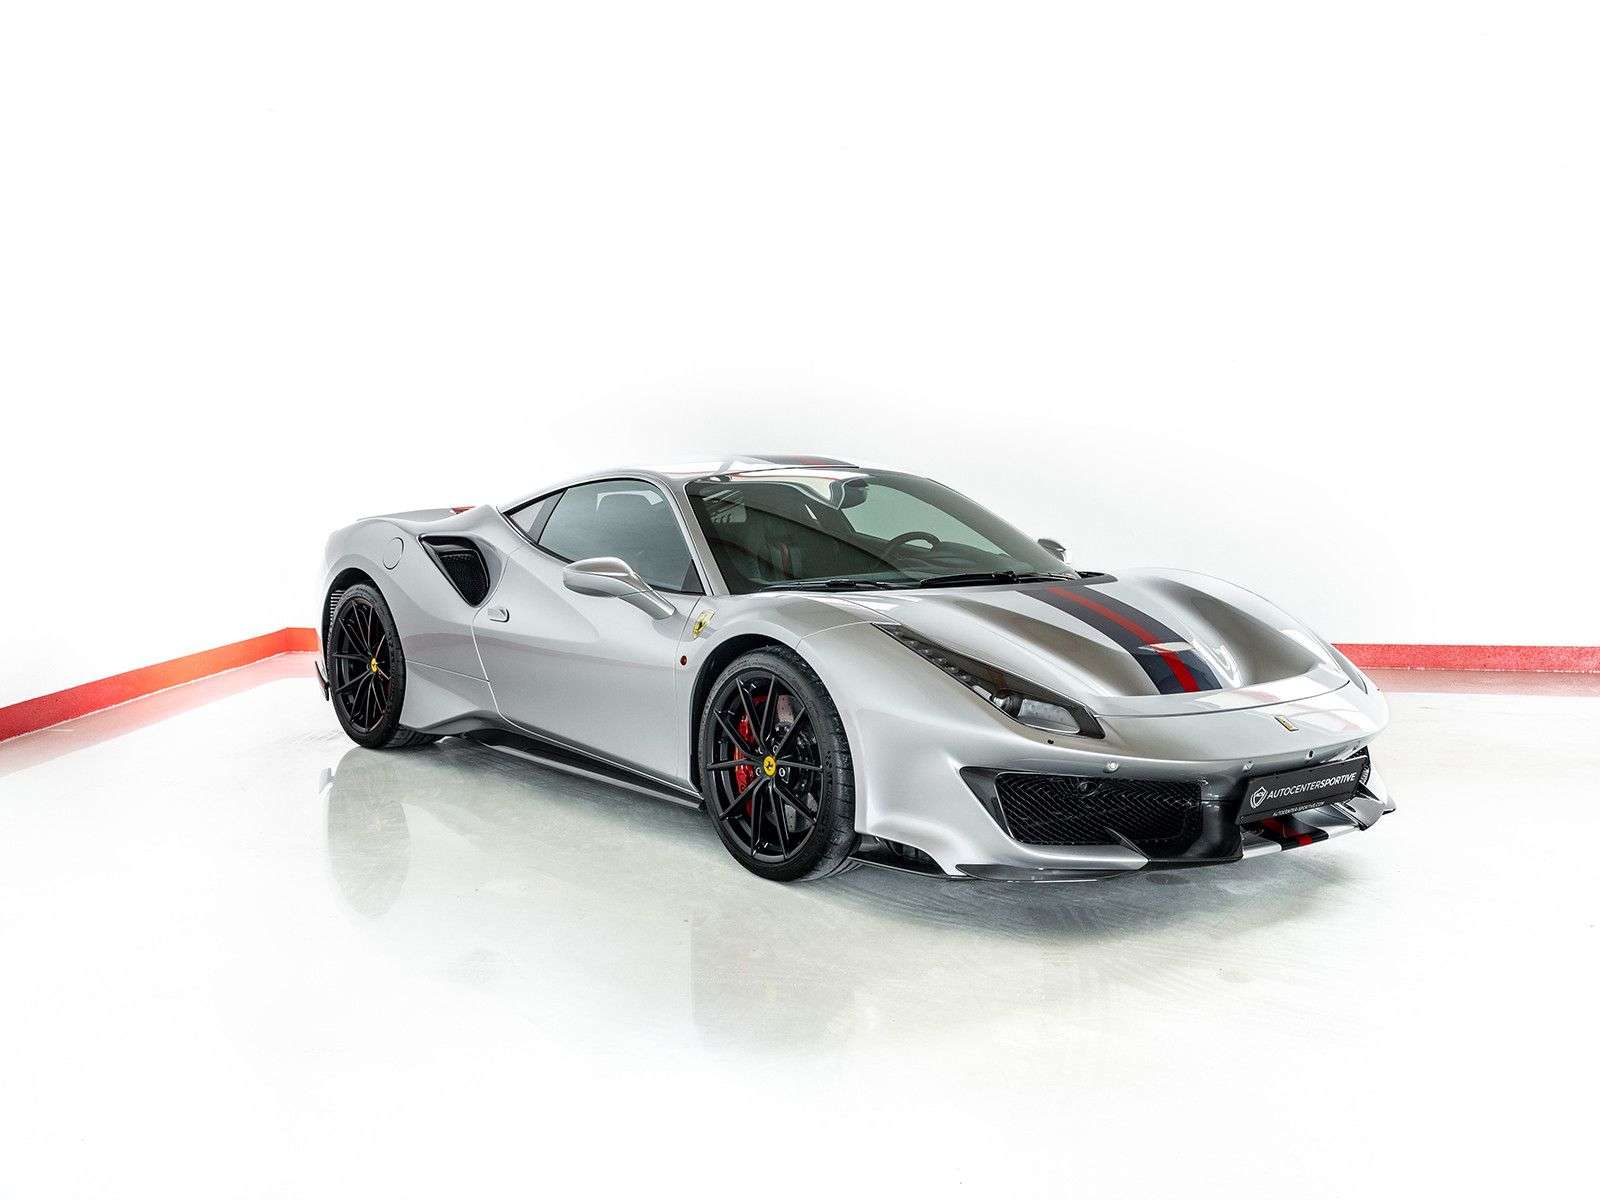 Ferrari 488 Coupe in Silver used in Bad Schussenried for € 408,990.-